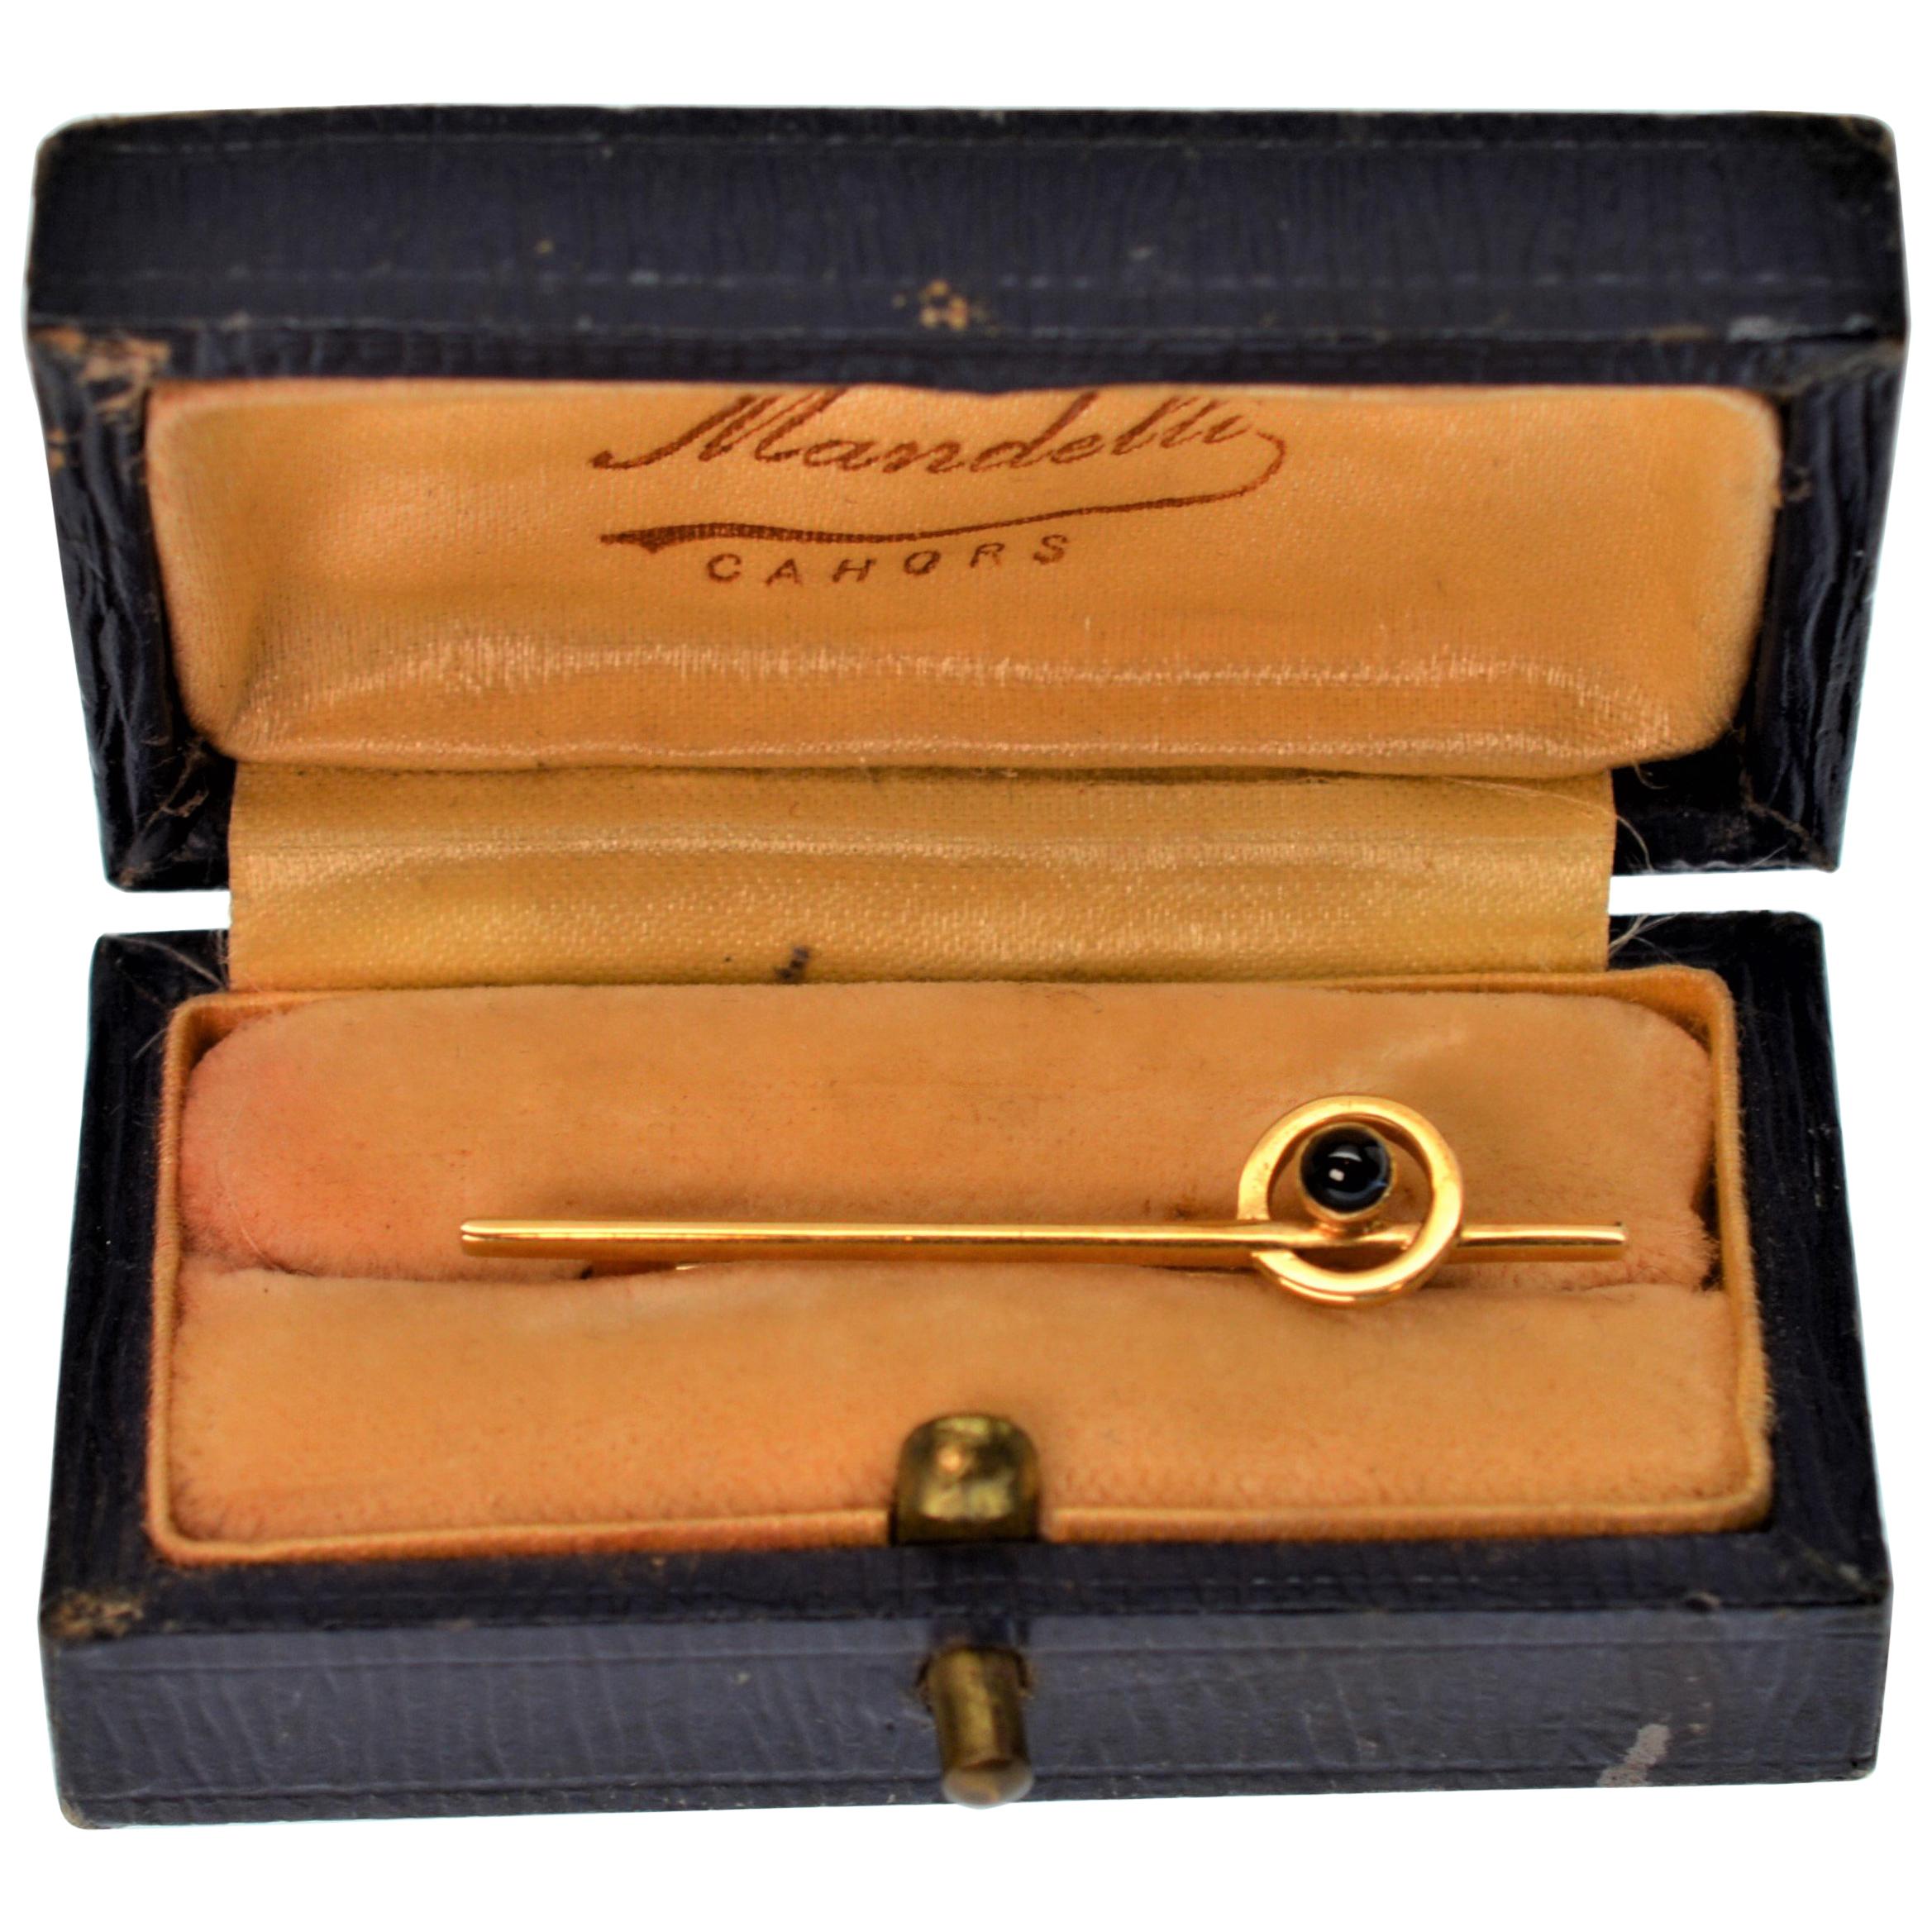 Mandelli Cahors 14K Yellow Gold Stick Pin w Blue Sapphire Cabachon in Orig Box 